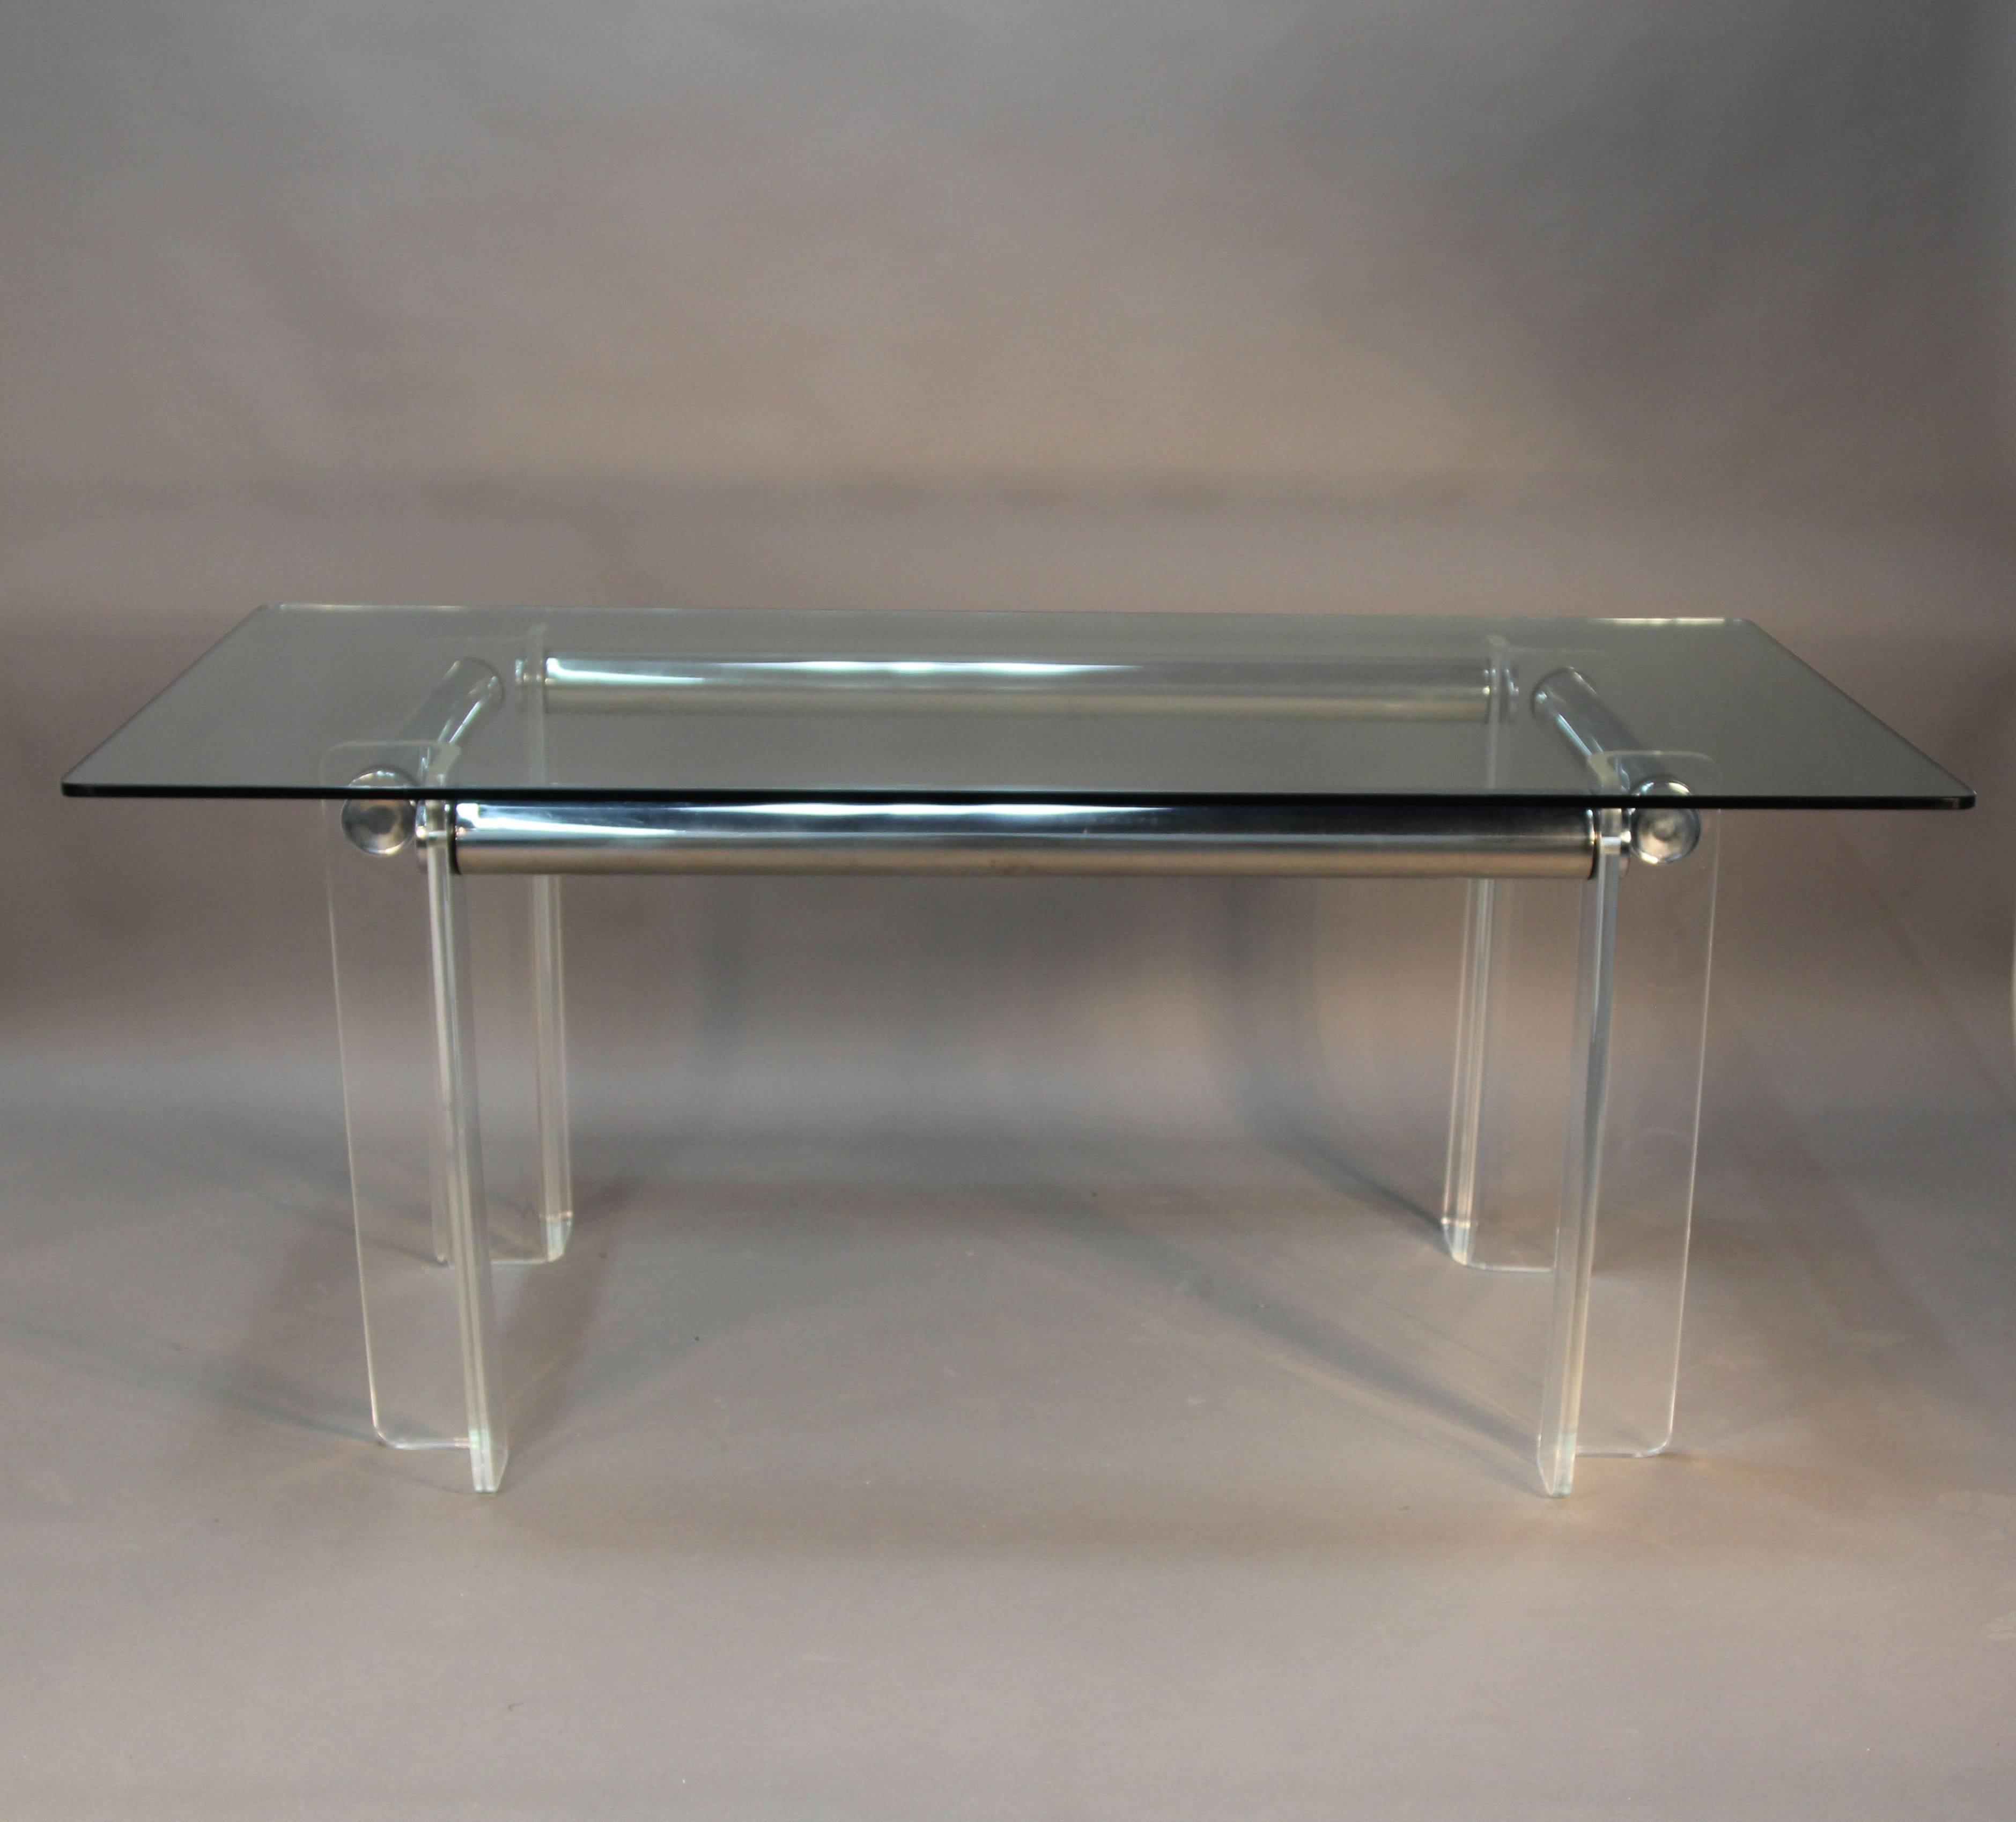 Beautiful Lucite with chrome pillar tube table base and glass top. Great for dining table, can hold much larger glass or desk.